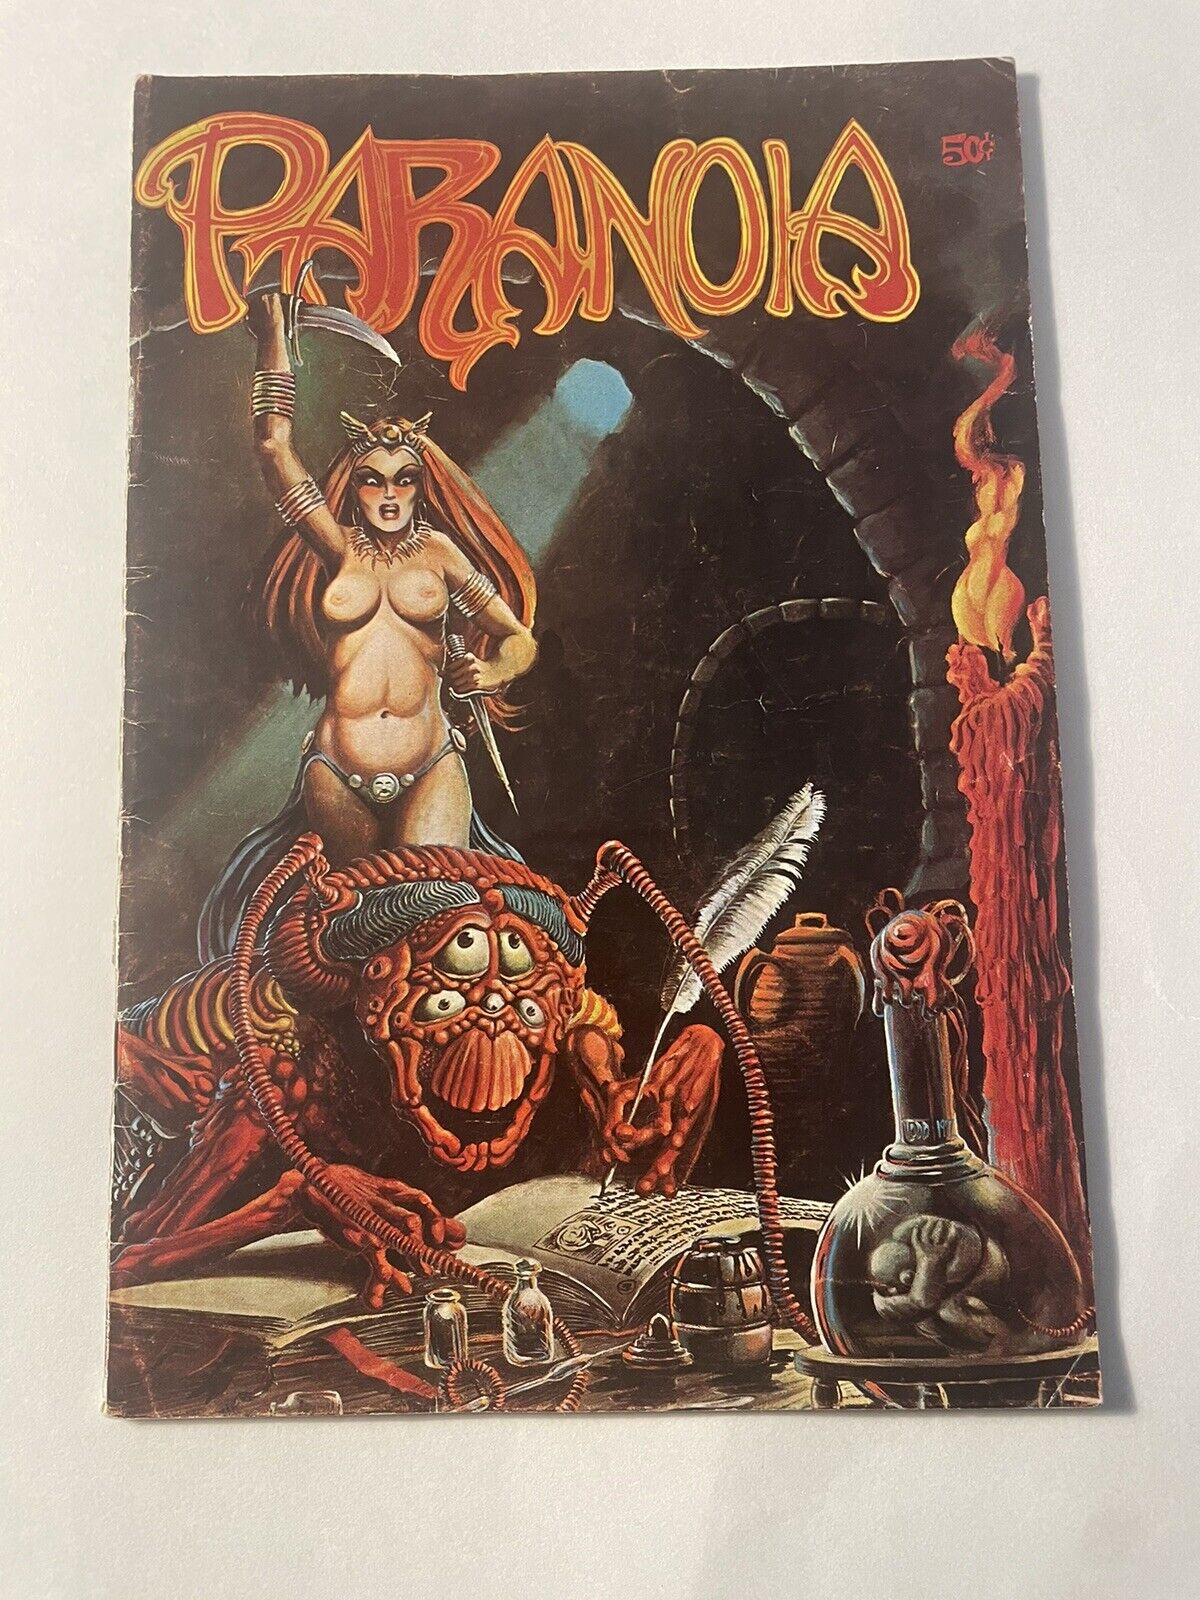 Paranoia co & sons underground comixs first print